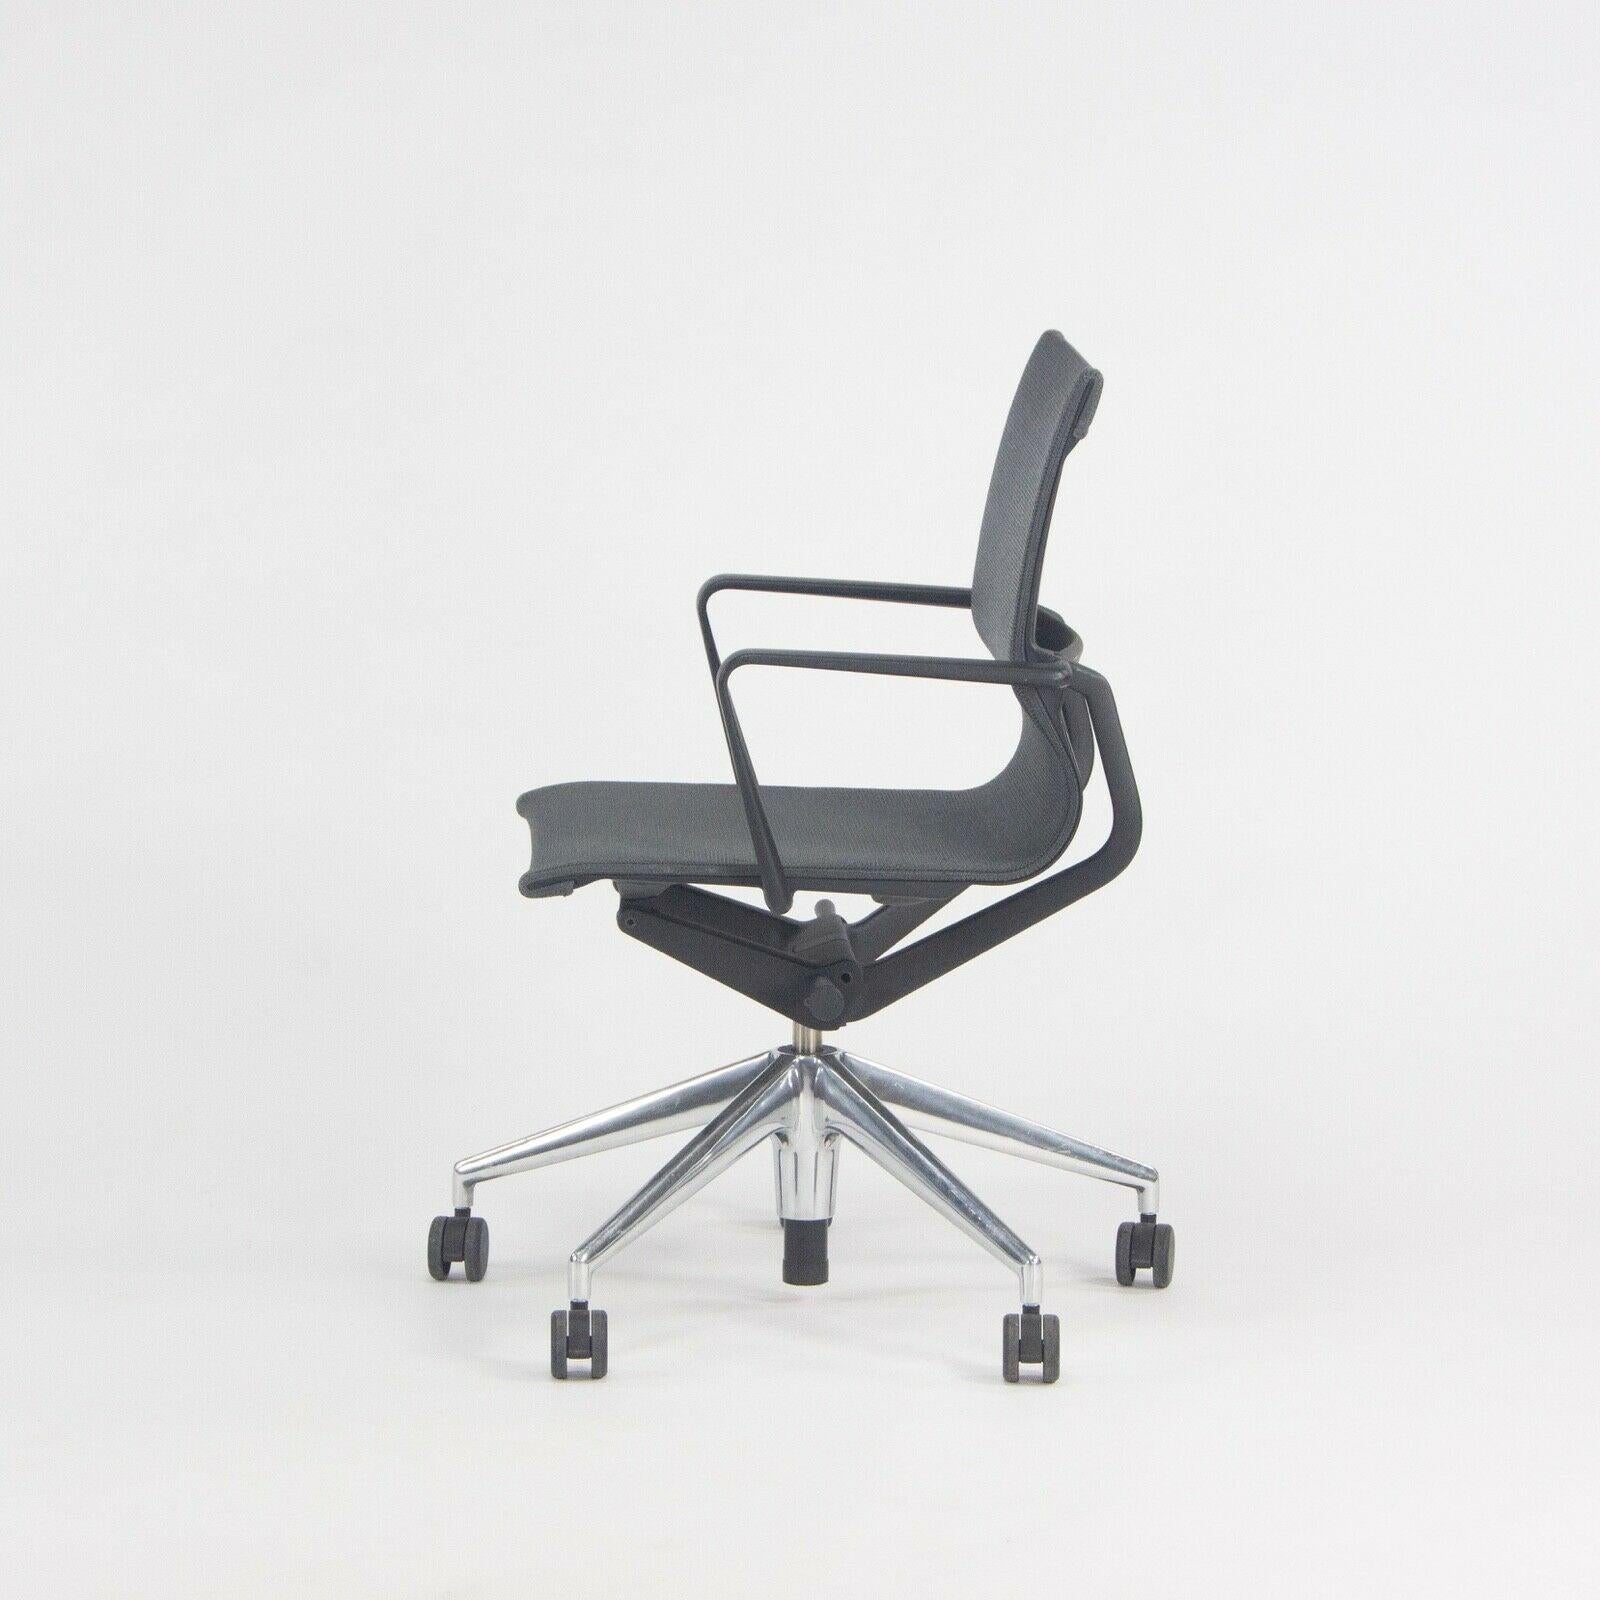 2018 Vitra Physix Rolling Desk Chair by Alberta Meda Gray Mesh Sets Available For Sale 1